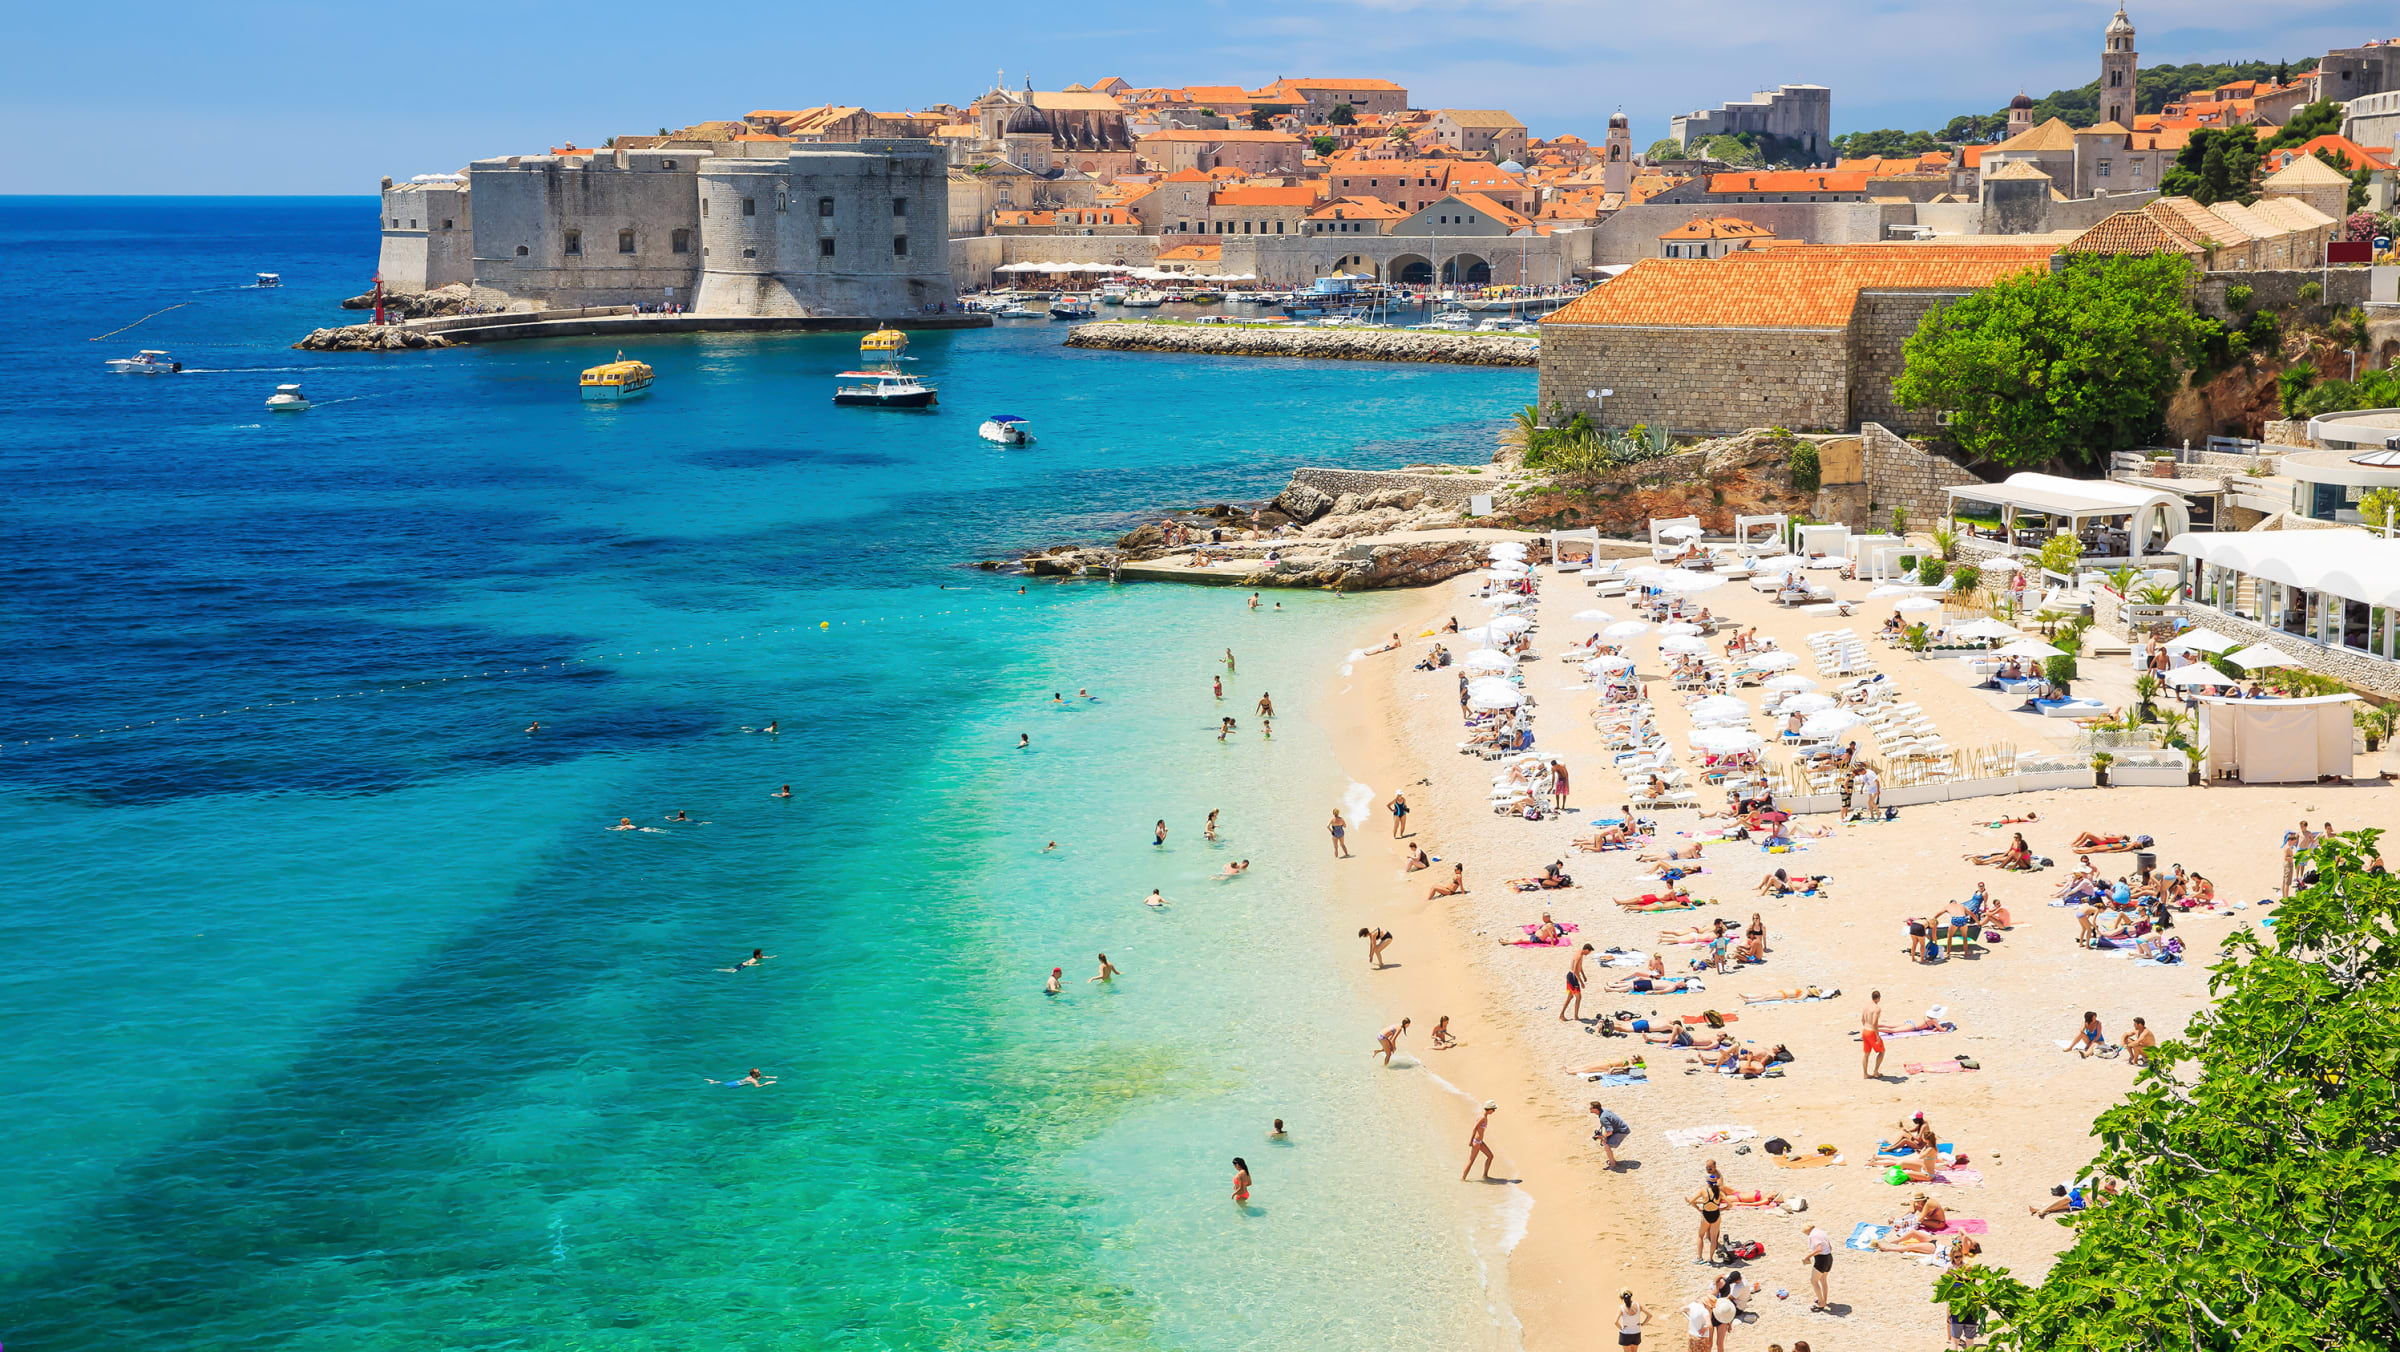 fun facts about croatia
interesting facts about croatia
croatia facts and information
interesting things about croatia
croatia facts
zagreb facts
croatia history facts
dubrovnik facts
croatia cia factbook
croatia culture facts
croatia trivia
dubrovnik fun facts
things about croatia
cool facts about croatia
10 facts about croatia
weird facts about croatia